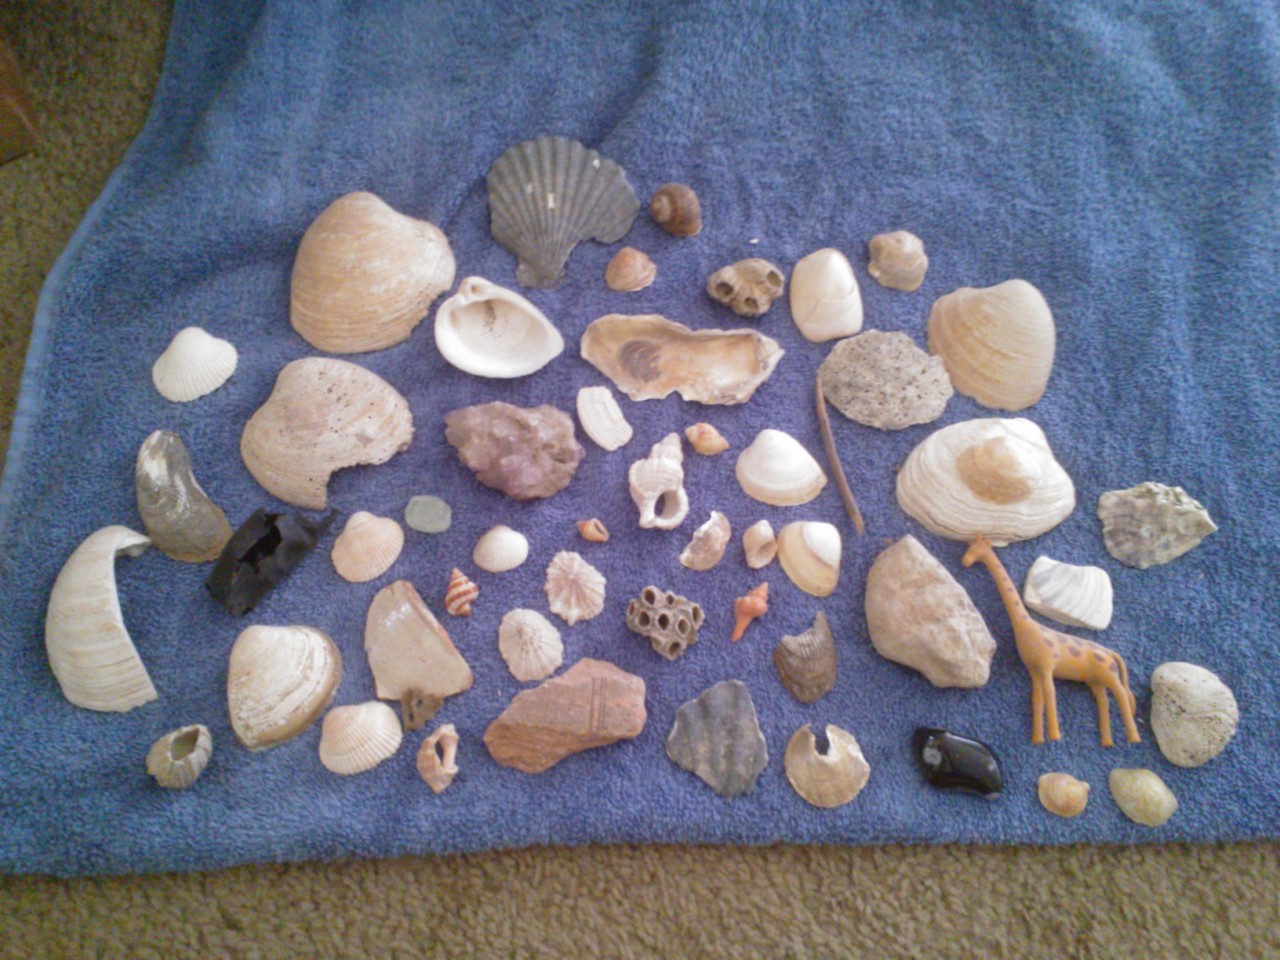 ileftmyheartinwesteros:  My mother mailed me my seashells:) All of these were found